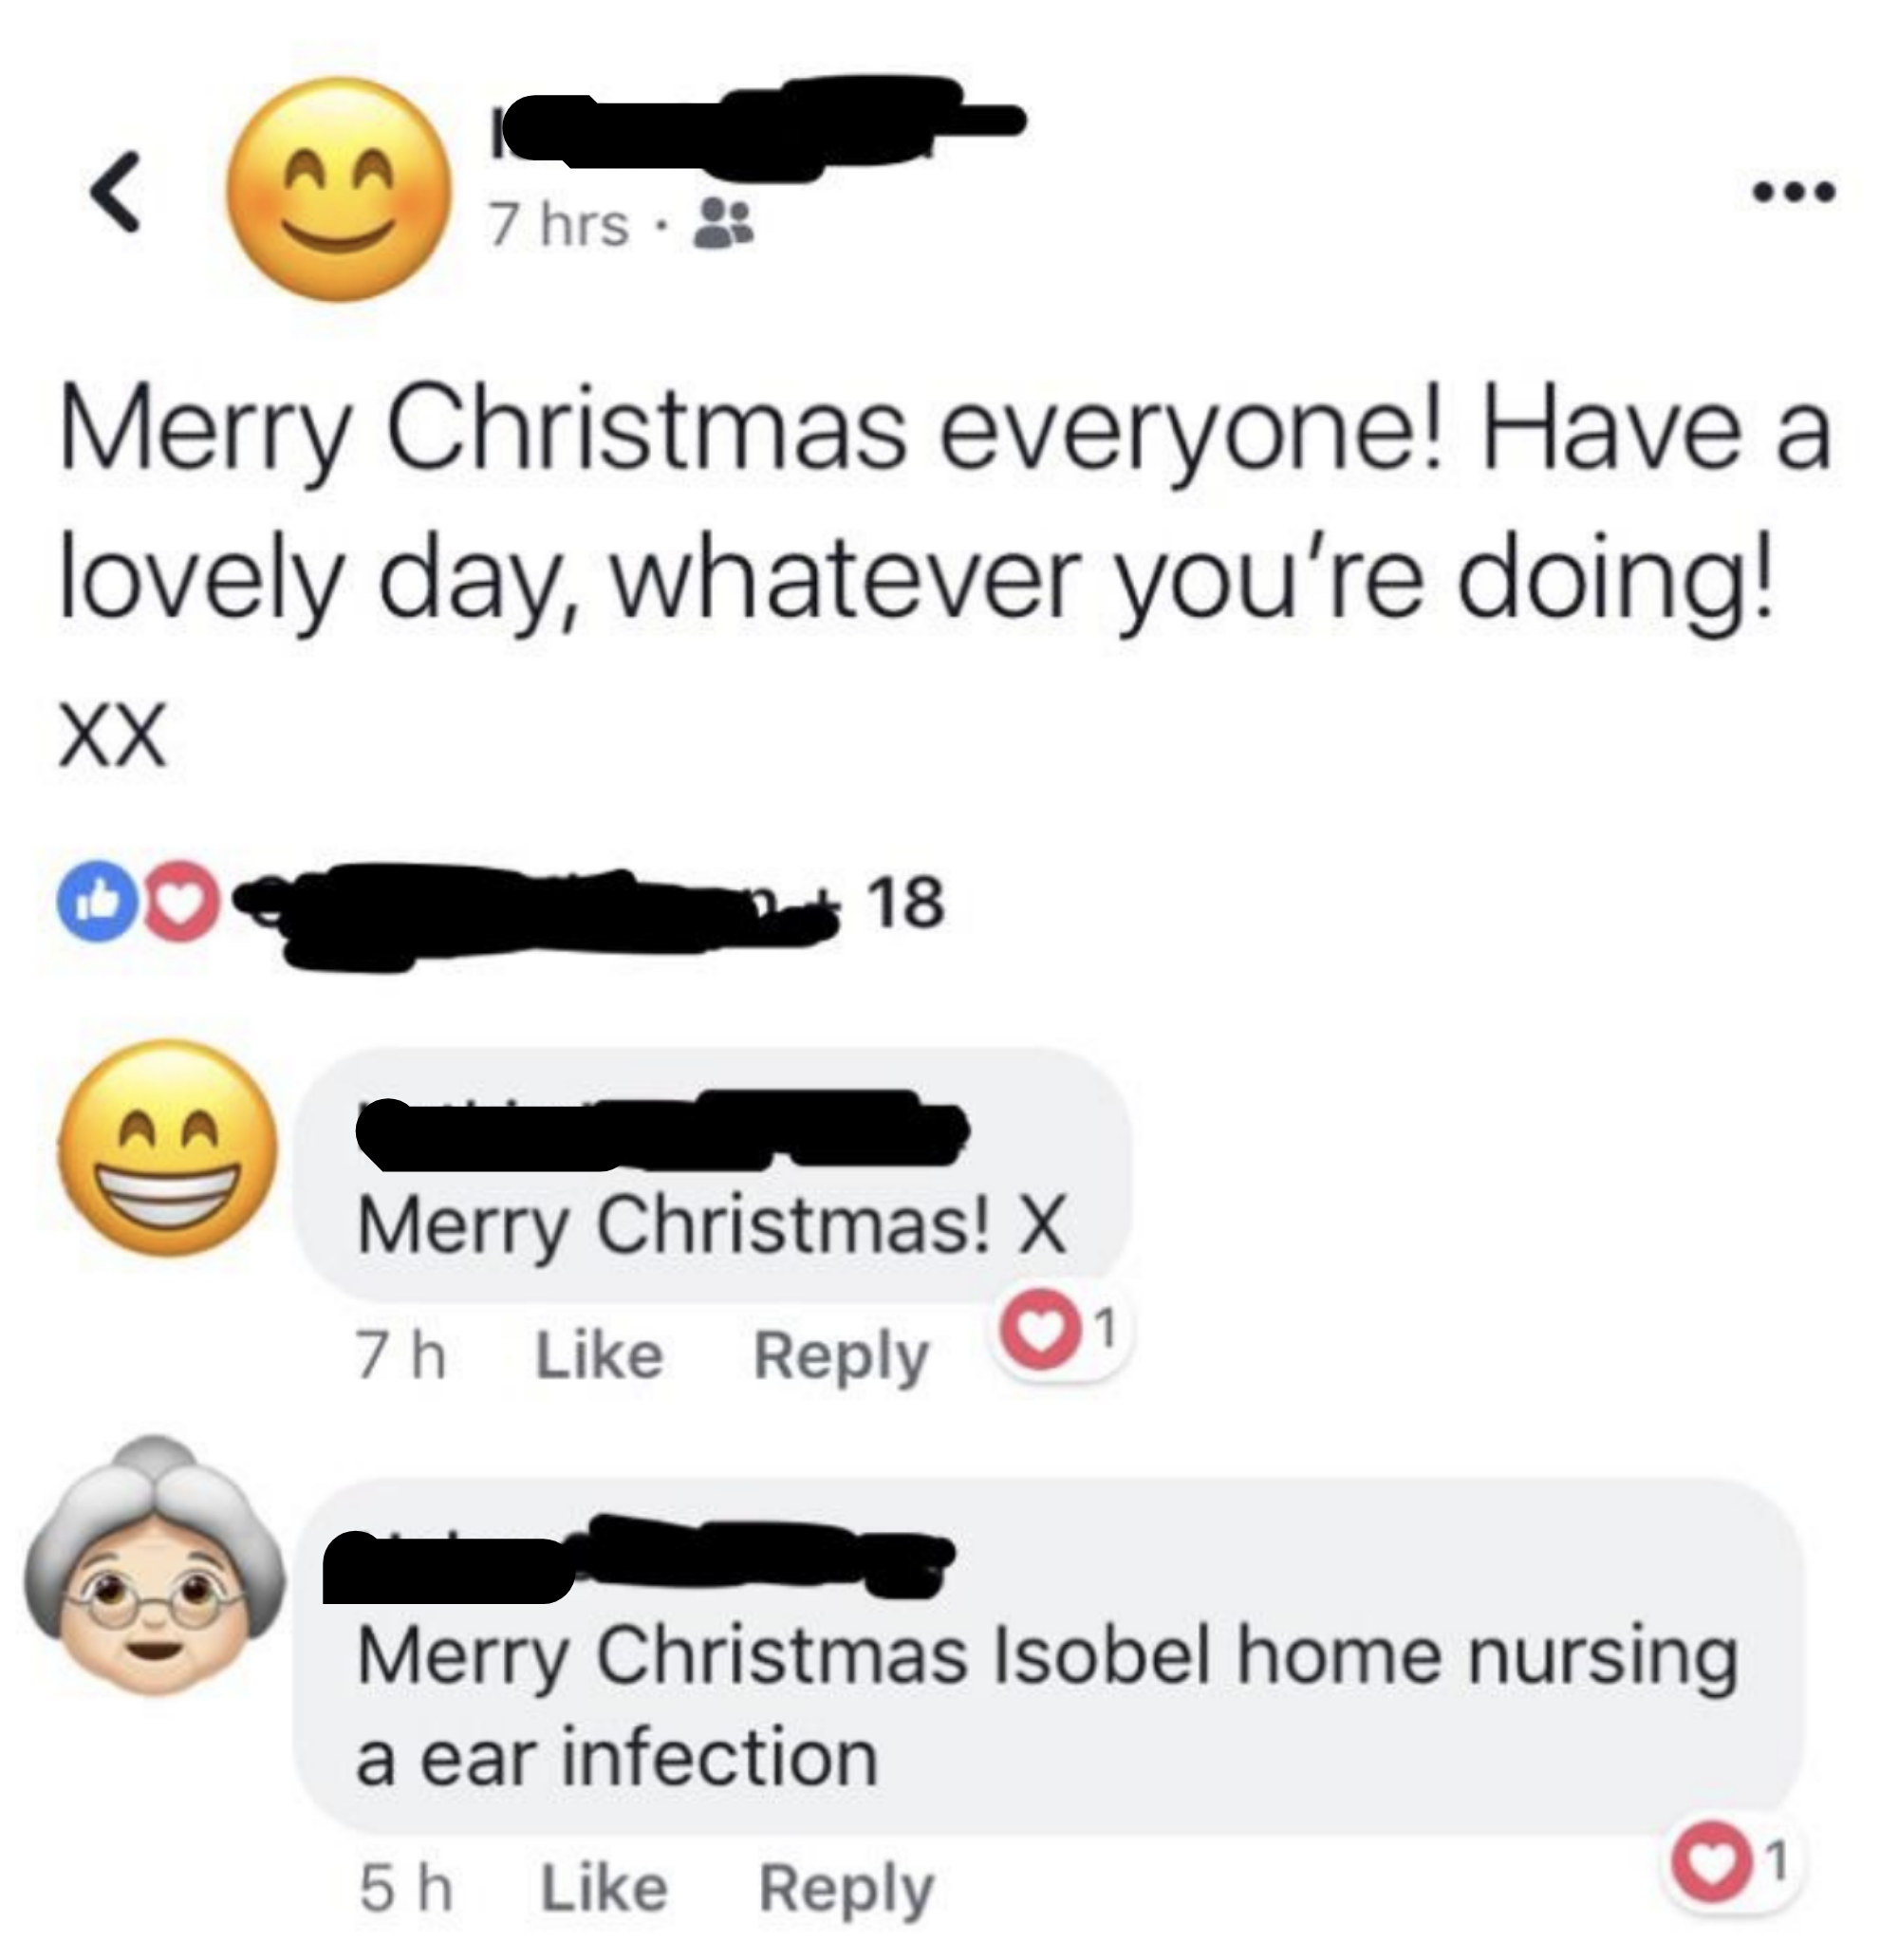 merry christmas, isoble. home nursing a ear infection